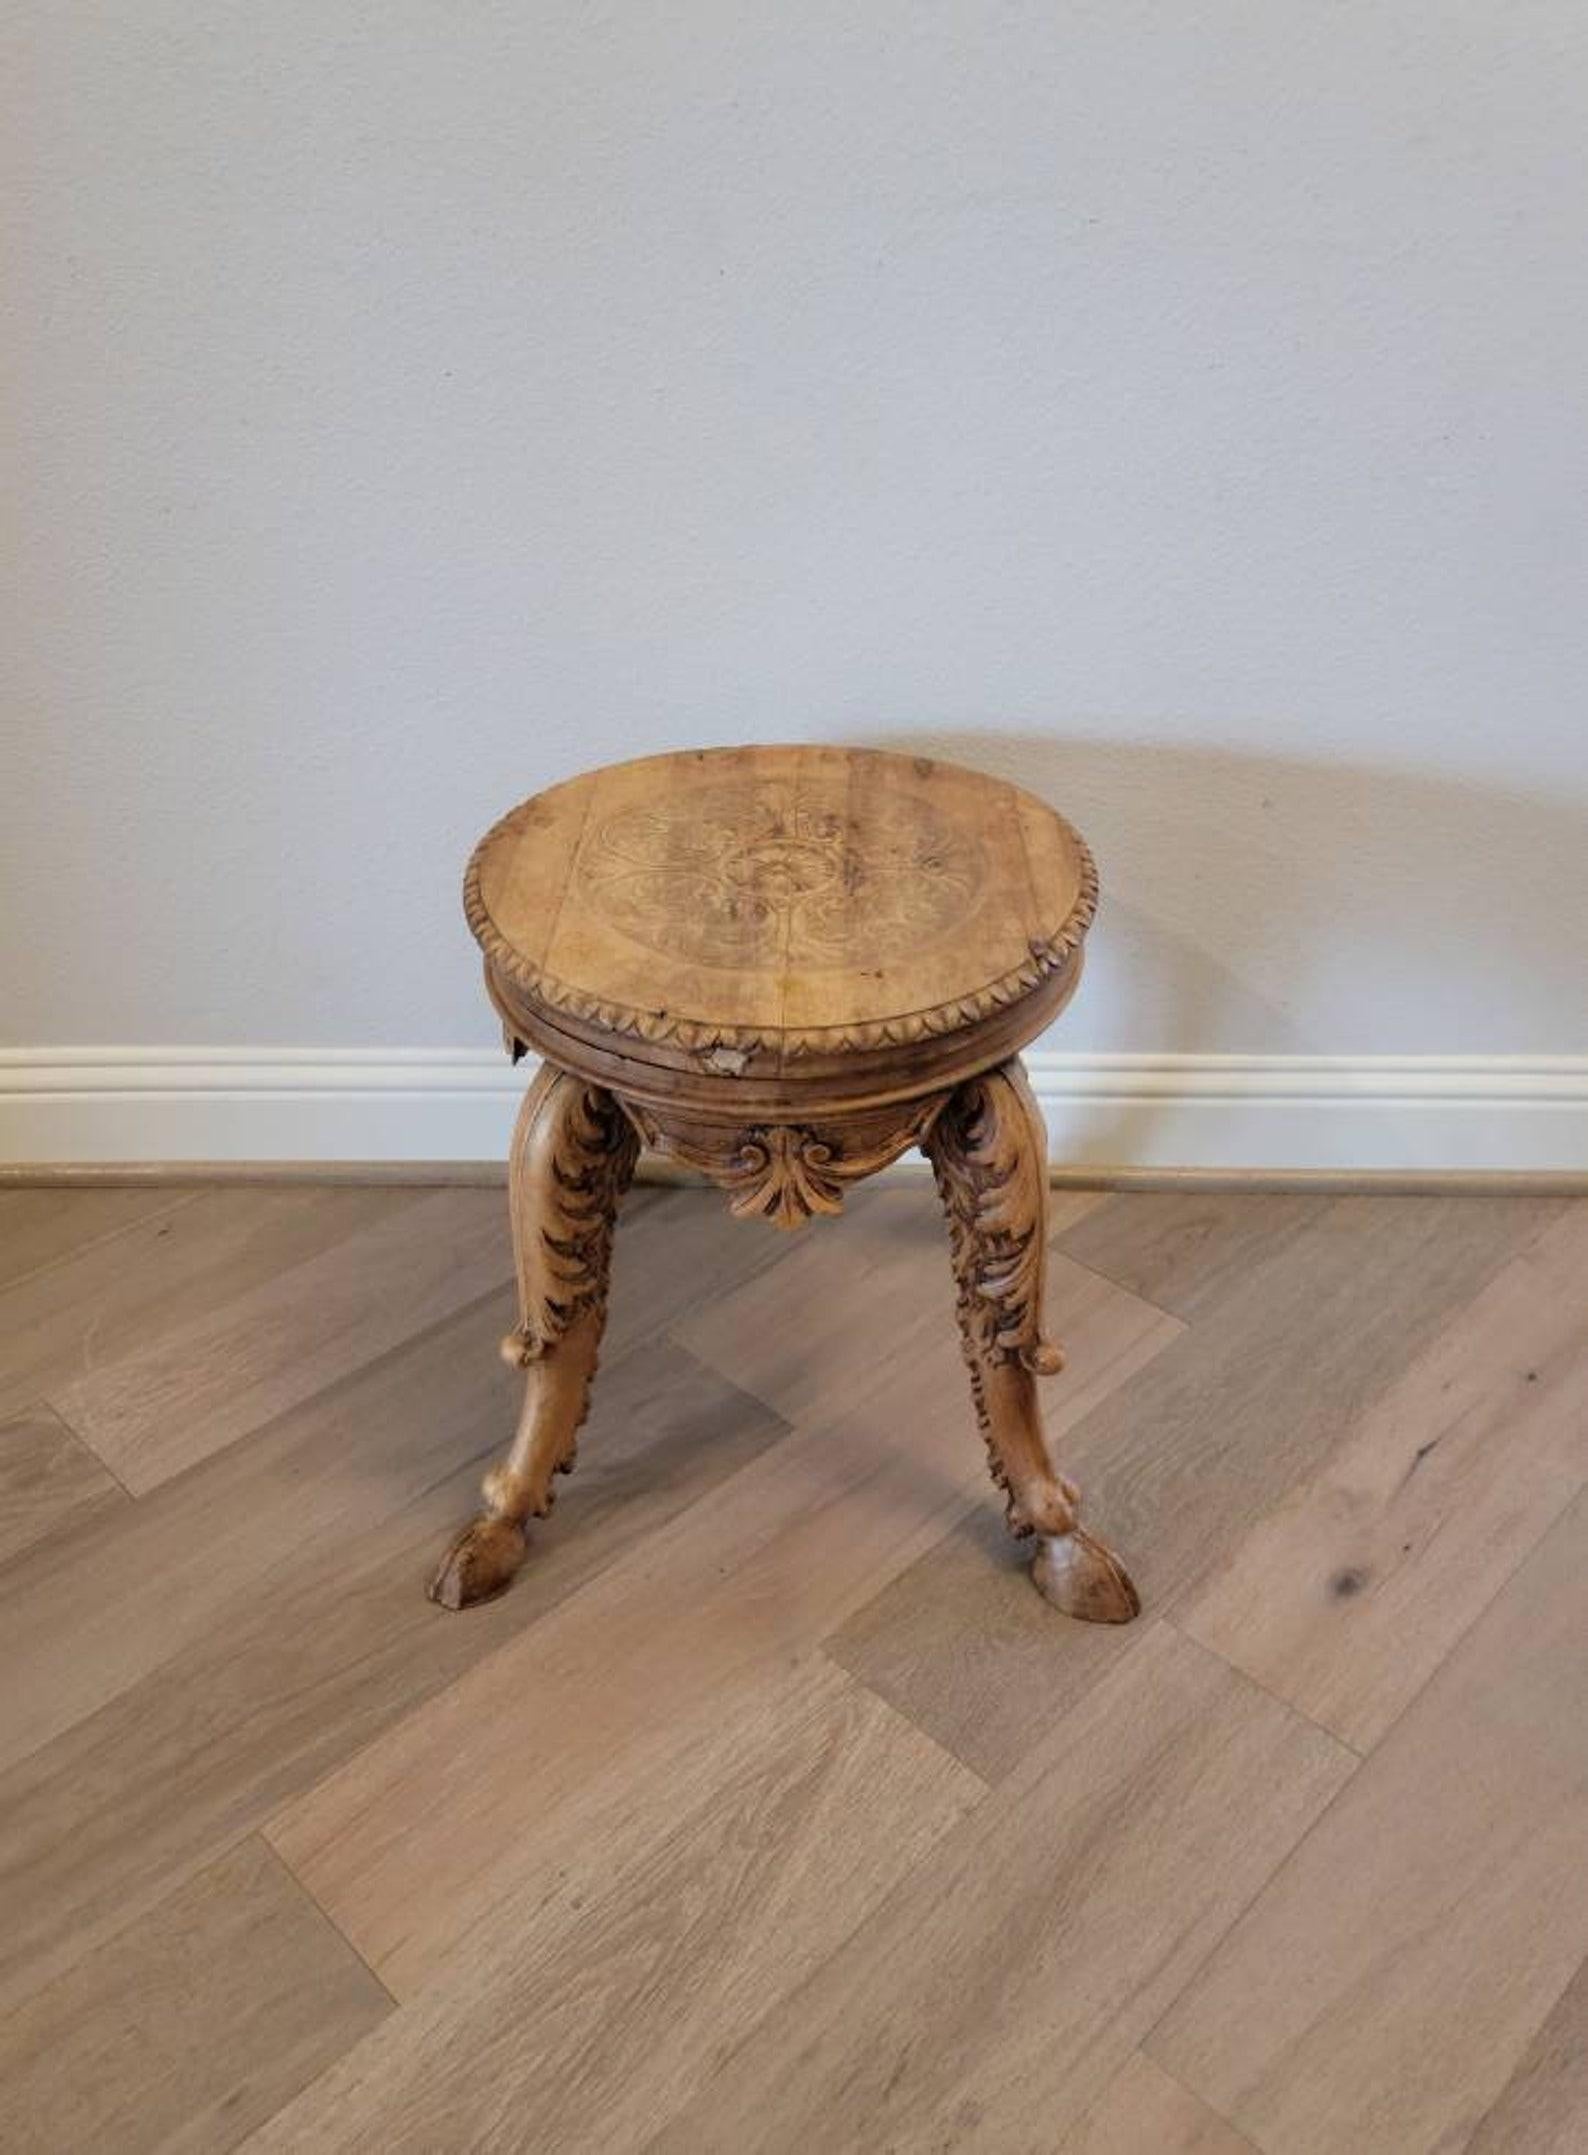 19th Century Swedish Renaissance Revival Birch Piano Stool / Side Table In Good Condition For Sale In Forney, TX